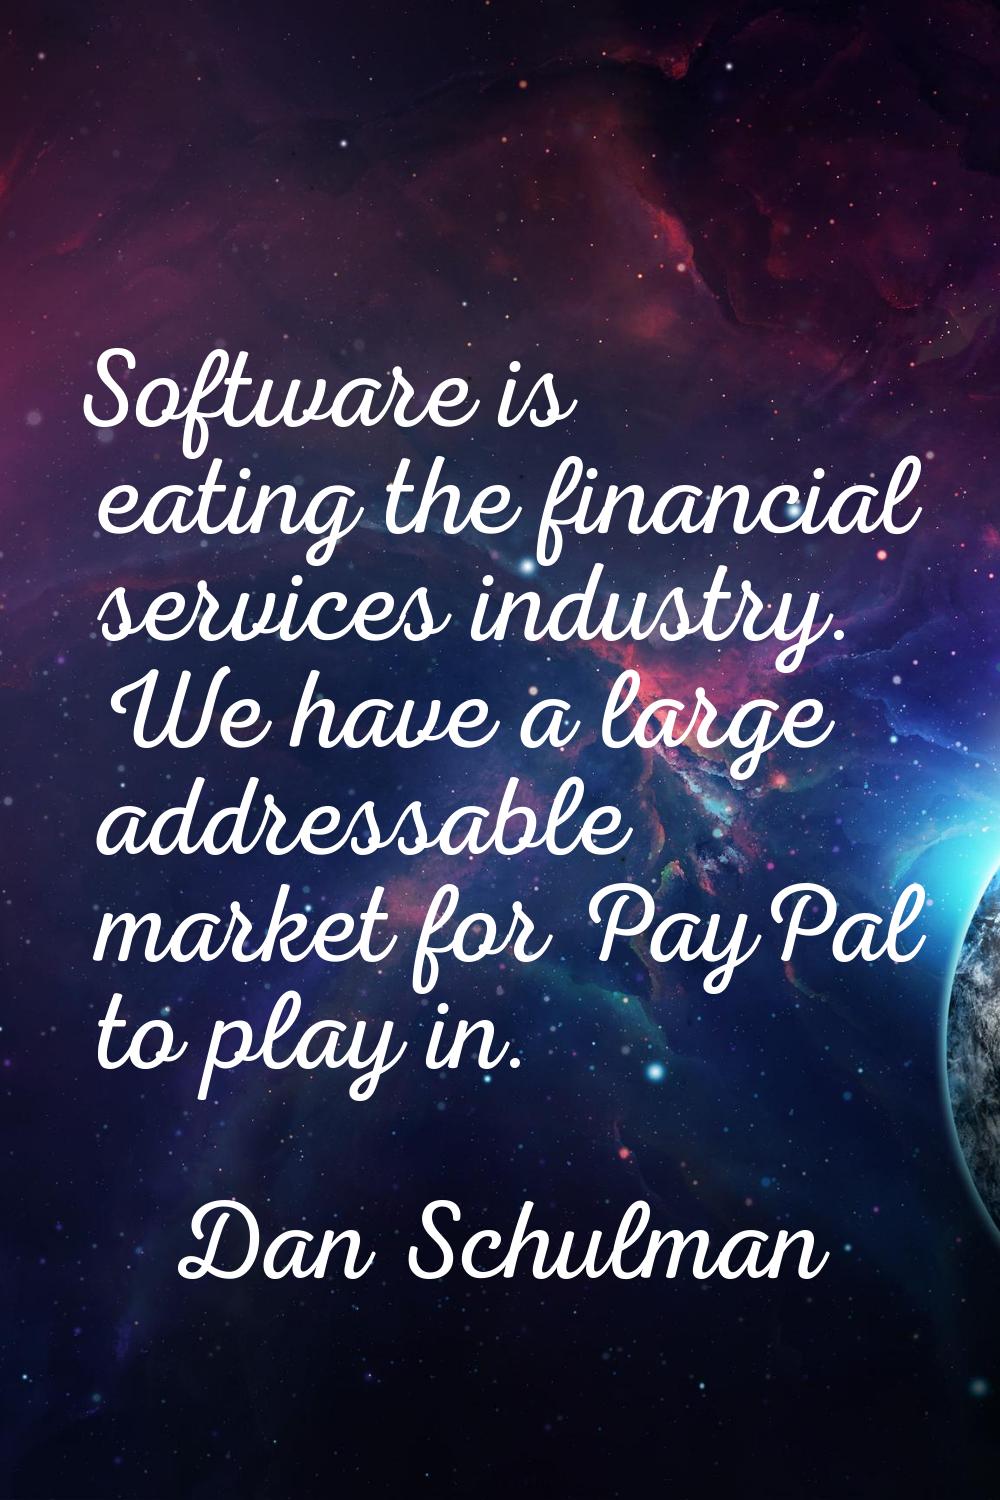 Software is eating the financial services industry. We have a large addressable market for PayPal t